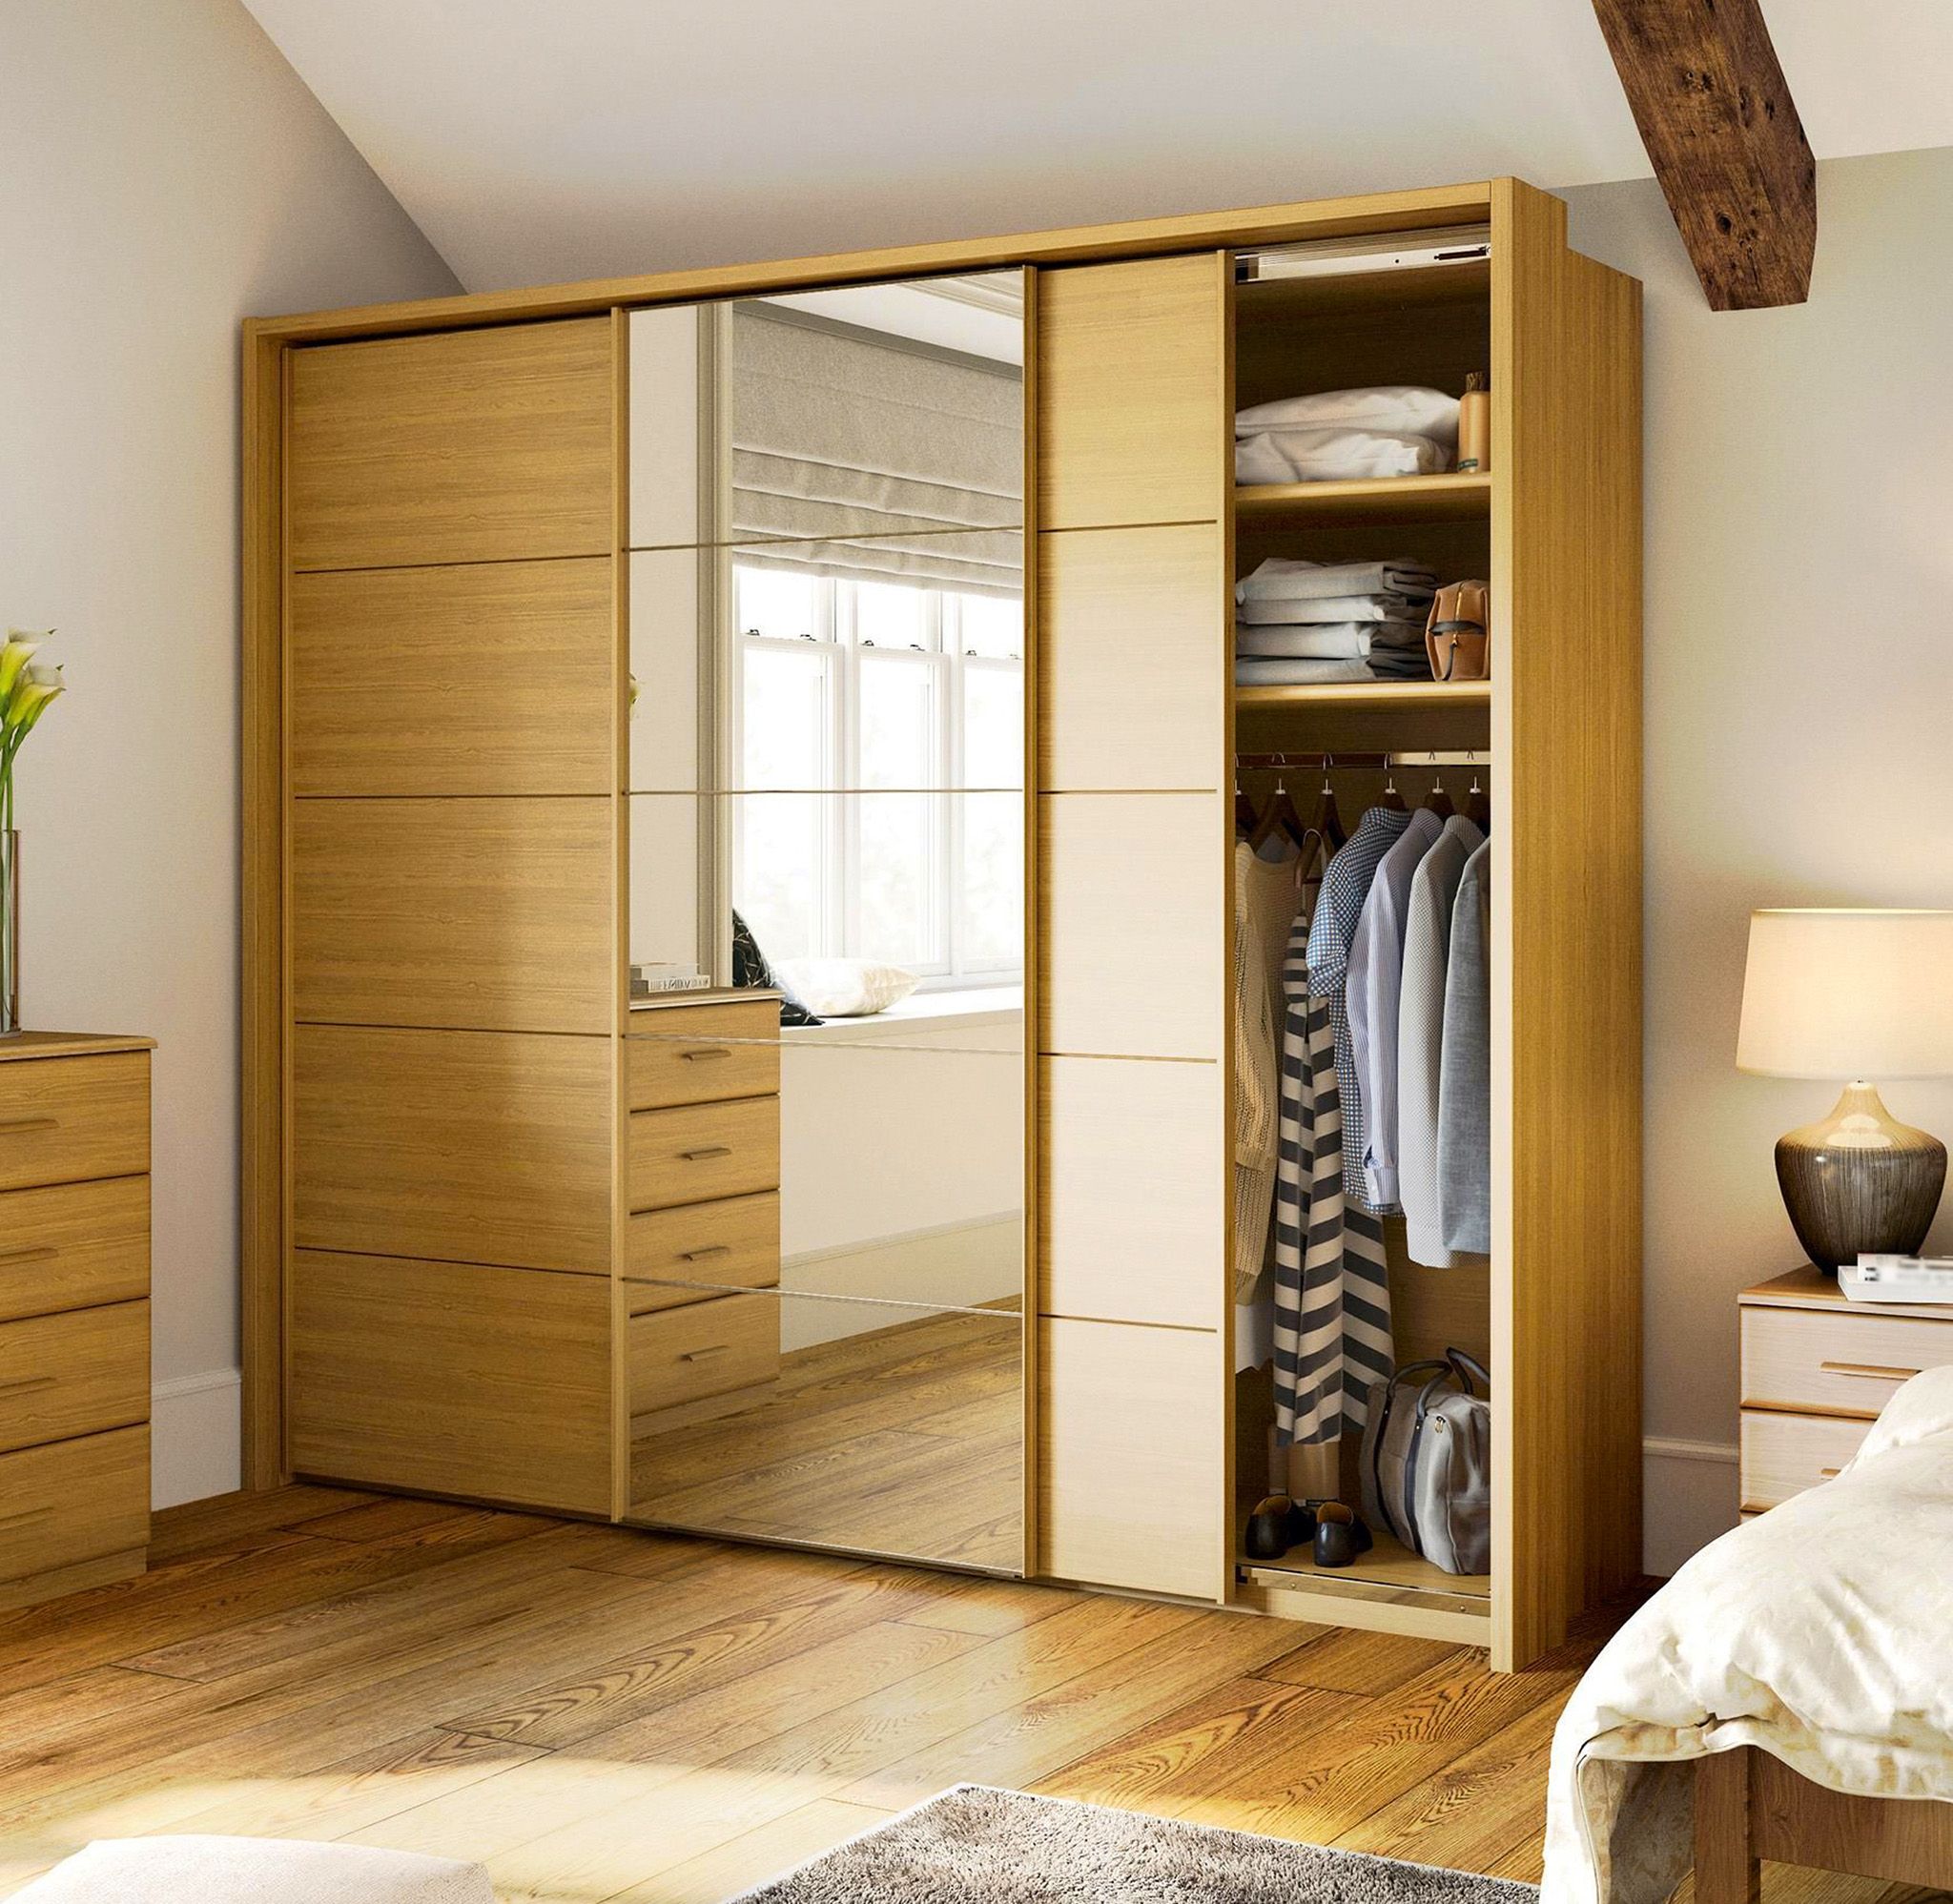 Fitted Wardrobes Ideas | Elegant Mirrored Wardrobe Designs In Mirrored Wardrobes With Drawers (View 11 of 15)